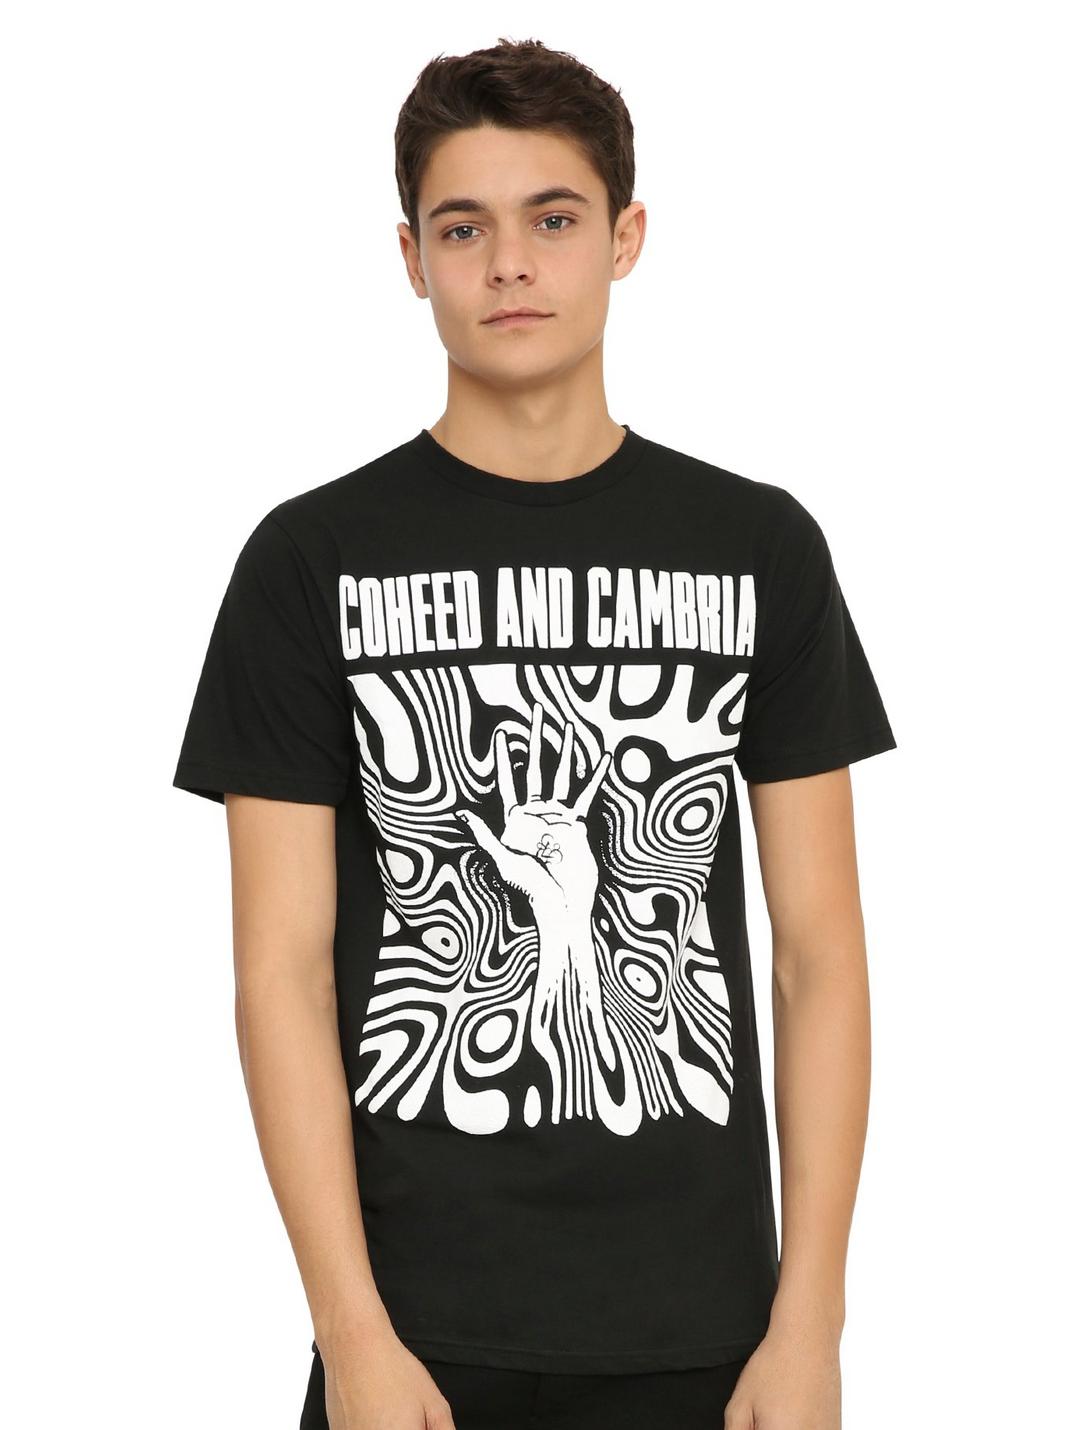 Coheed And Cambria Psychedelic Hand T-Shirt, BLACK, hi-res